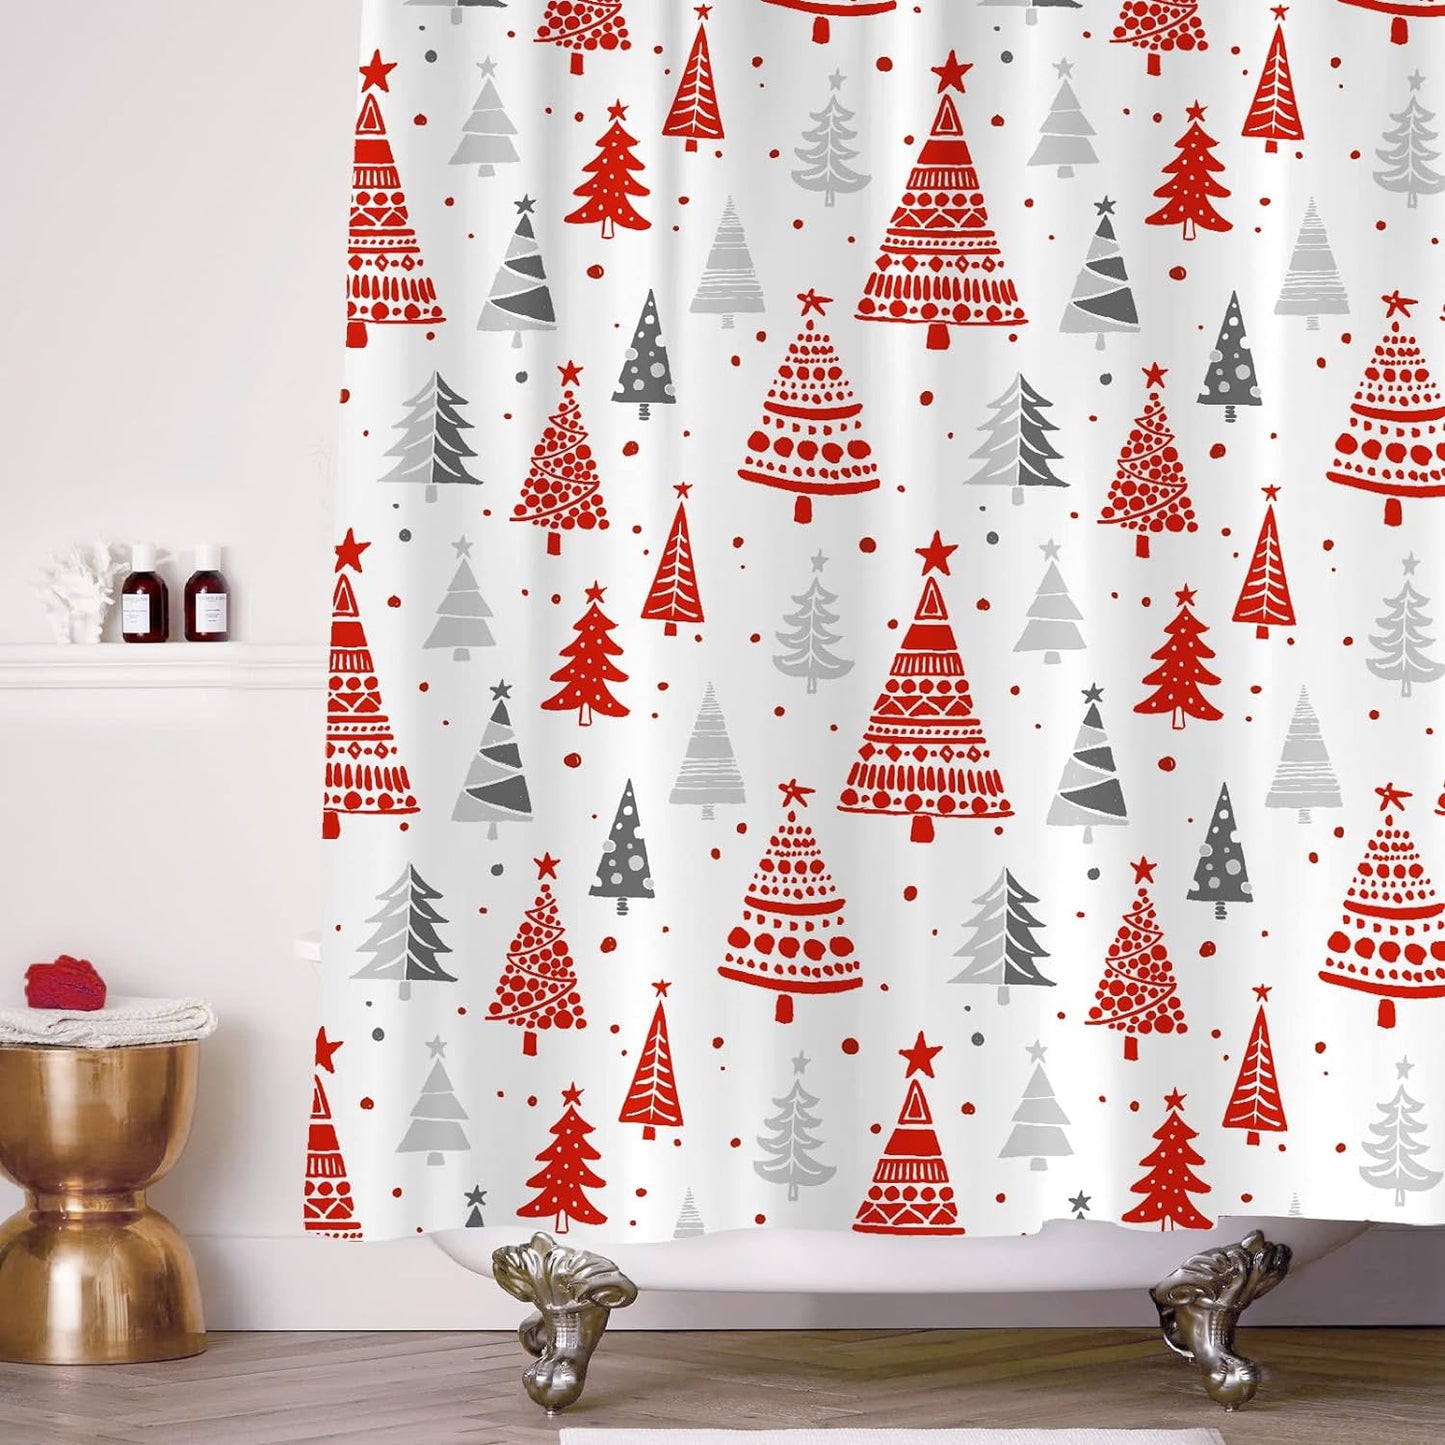 Christmas Shower Curtain, Red and Gray Xmas Trees with Stars and Snow Pattern Shower Curtain for Bathroom Decor, 71x71 Inch